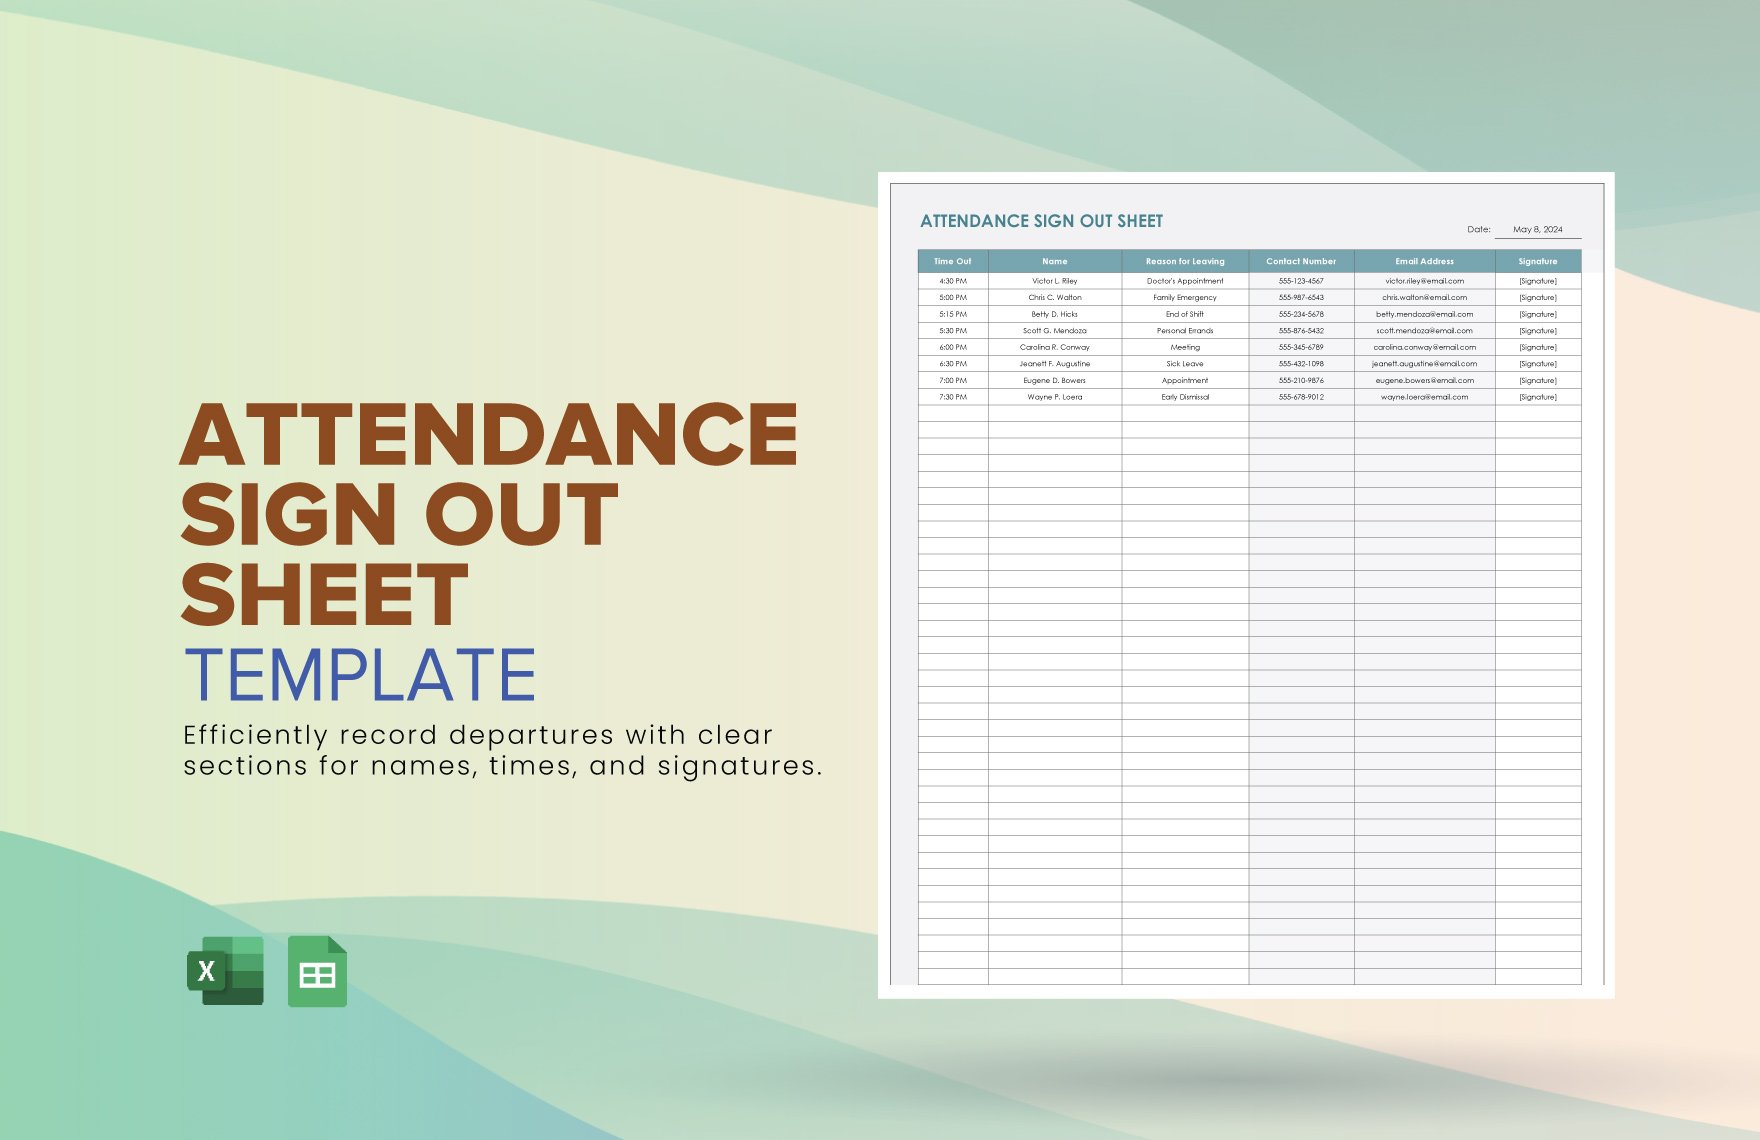 Attendance Sign Out Sheet Template in Excel, Google Sheets